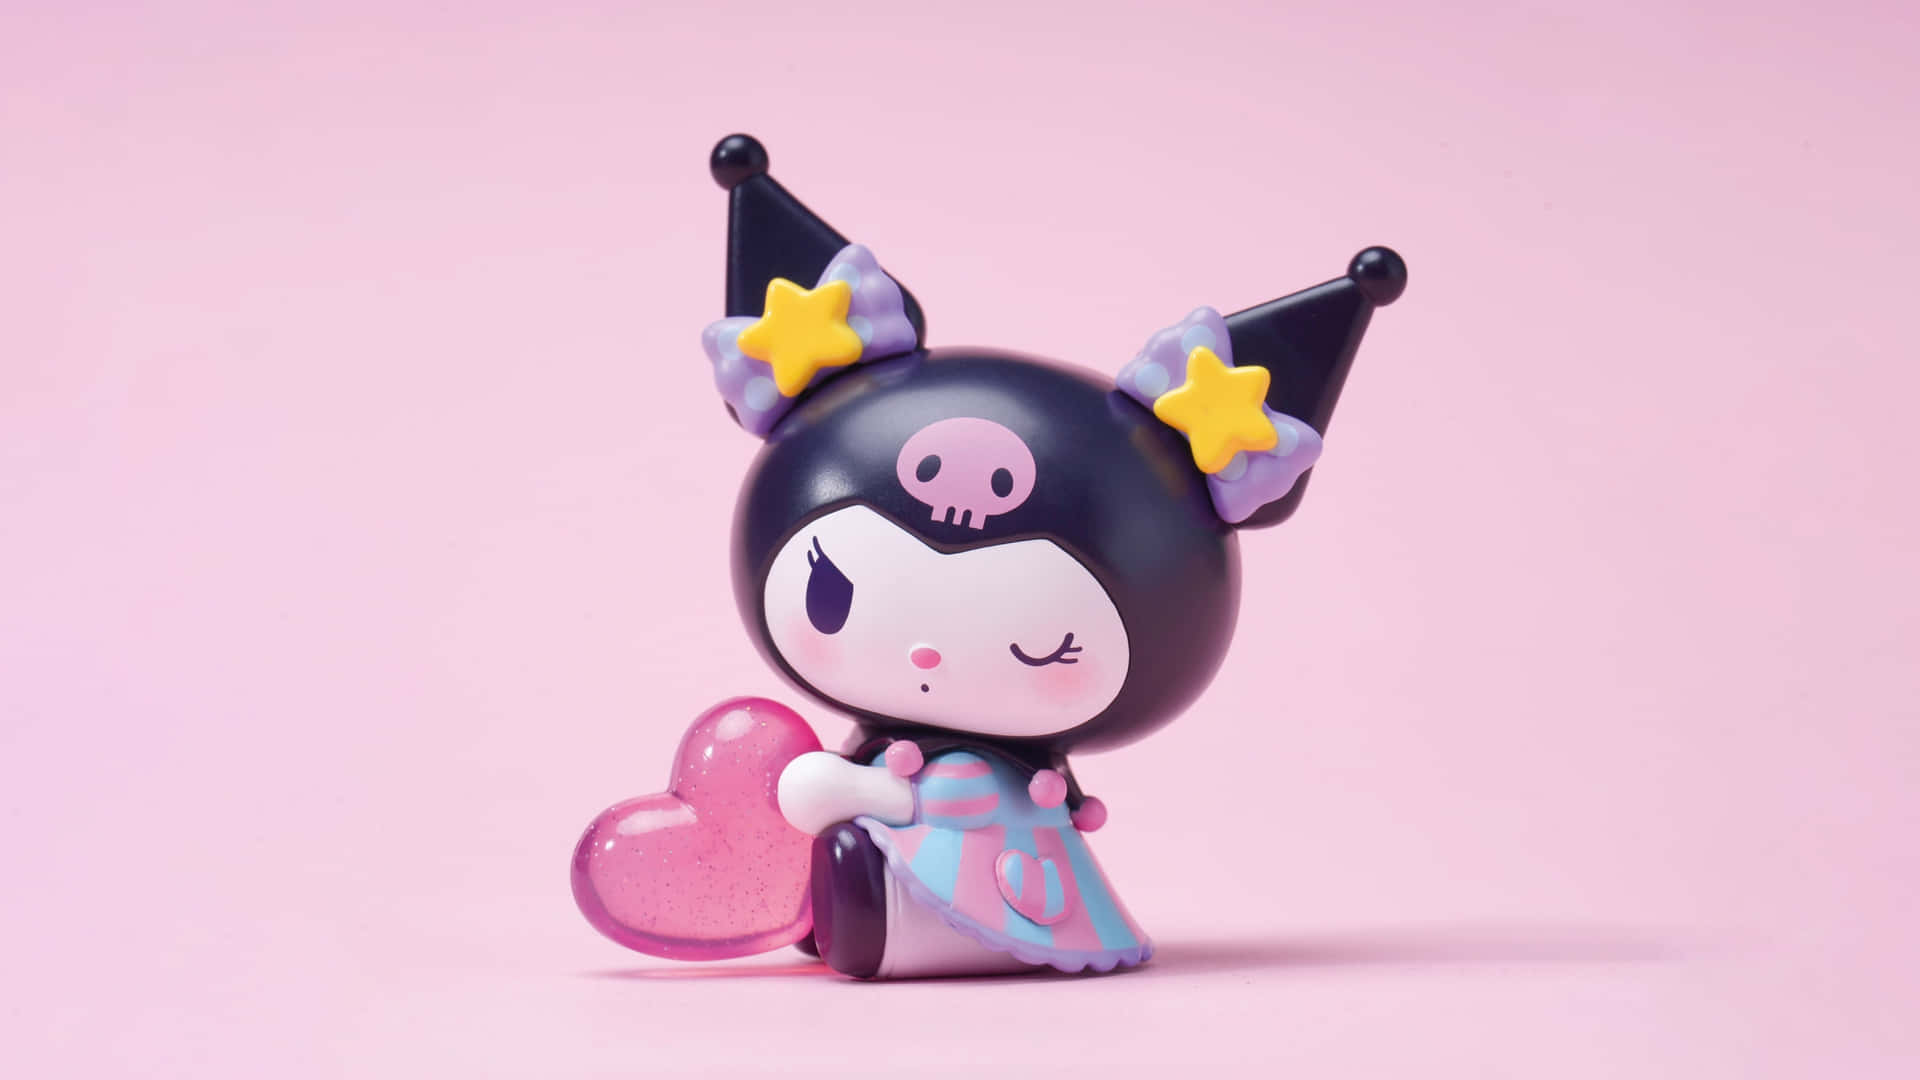 Cute Gothic Figure Pink Heart Aesthetic Wallpaper